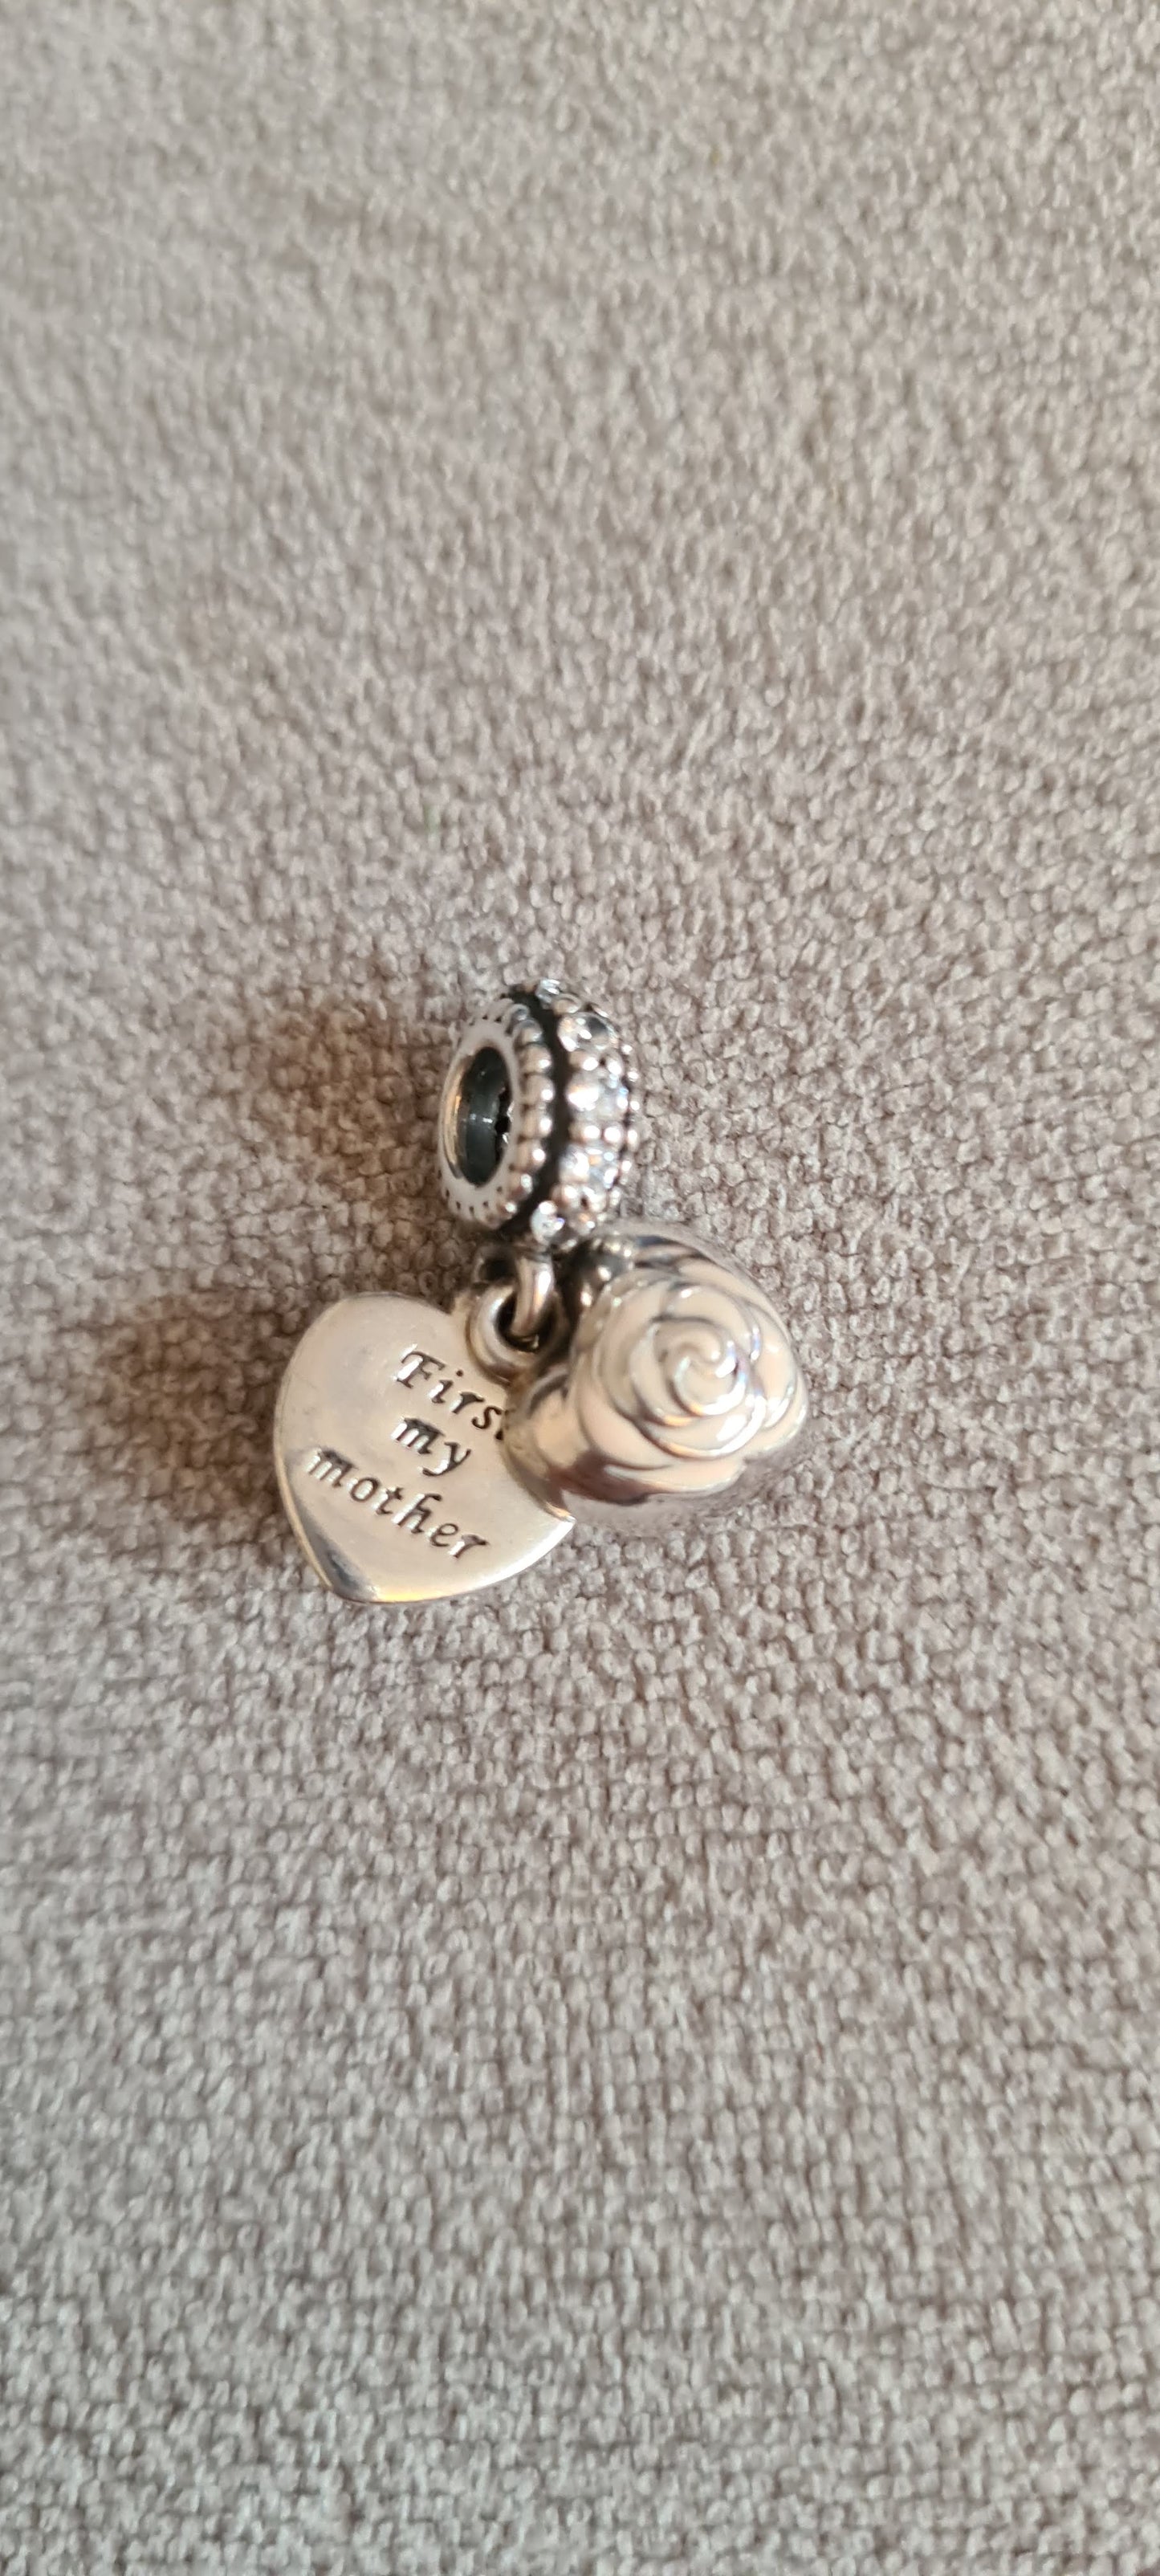 Genuine Pandora First My Mother Forever My friend Dangle Rose Charm Gift